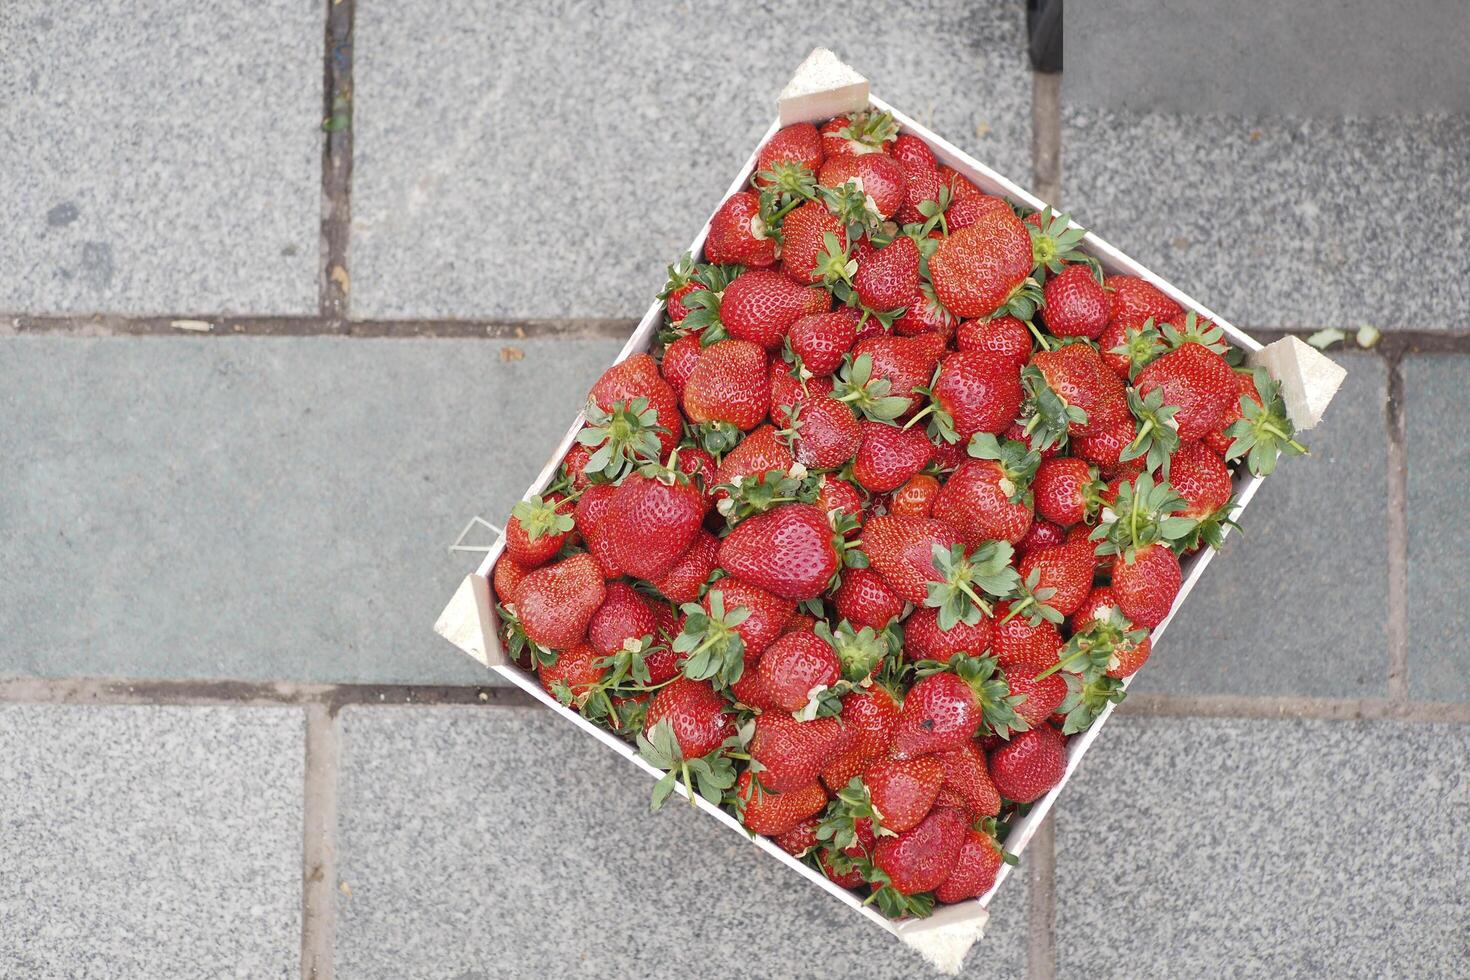 Strawberry boxes of freshly picked strawberries photo